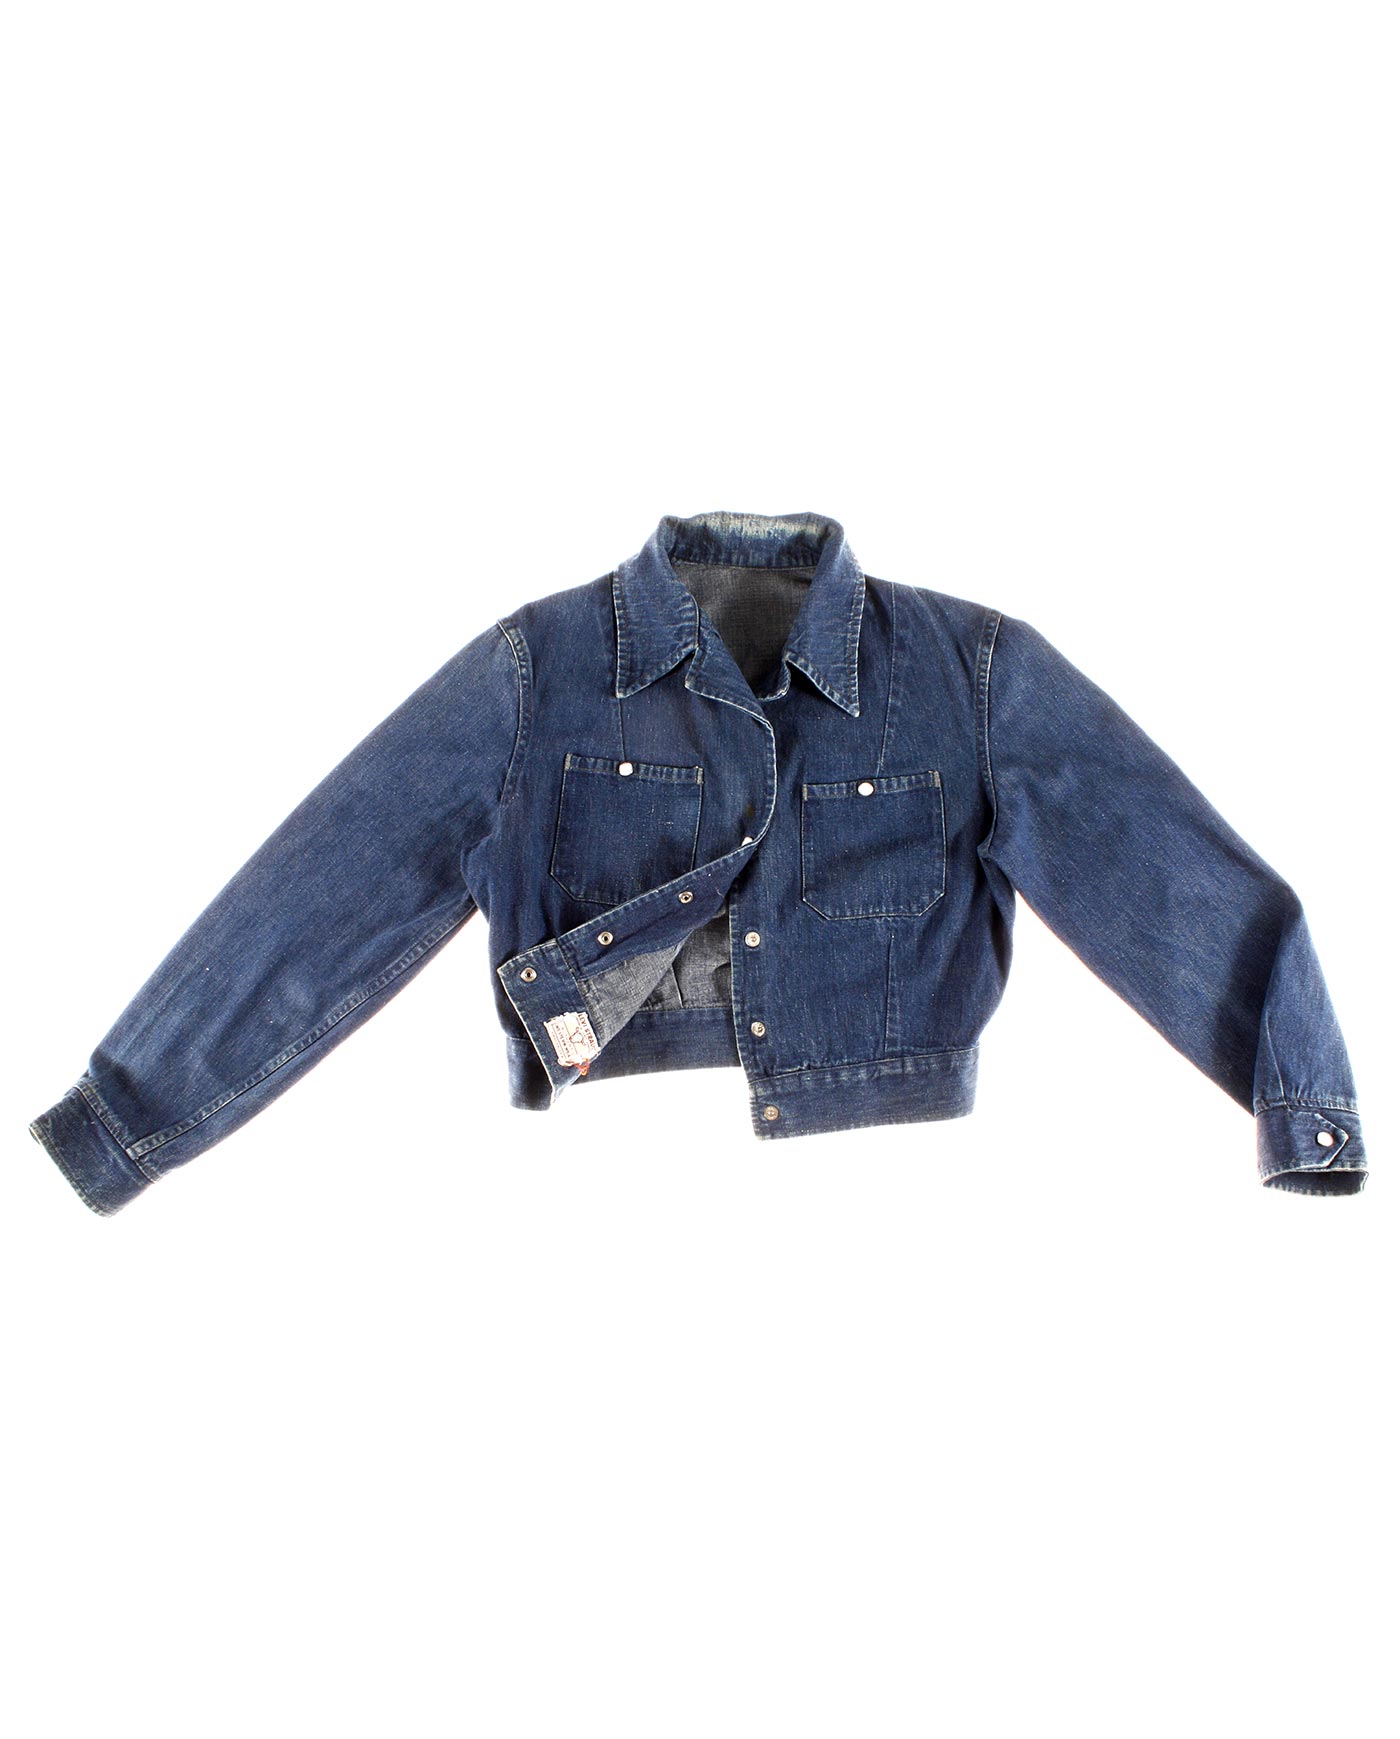 Levi's Authentic Western Wear ., SAVE 32% 